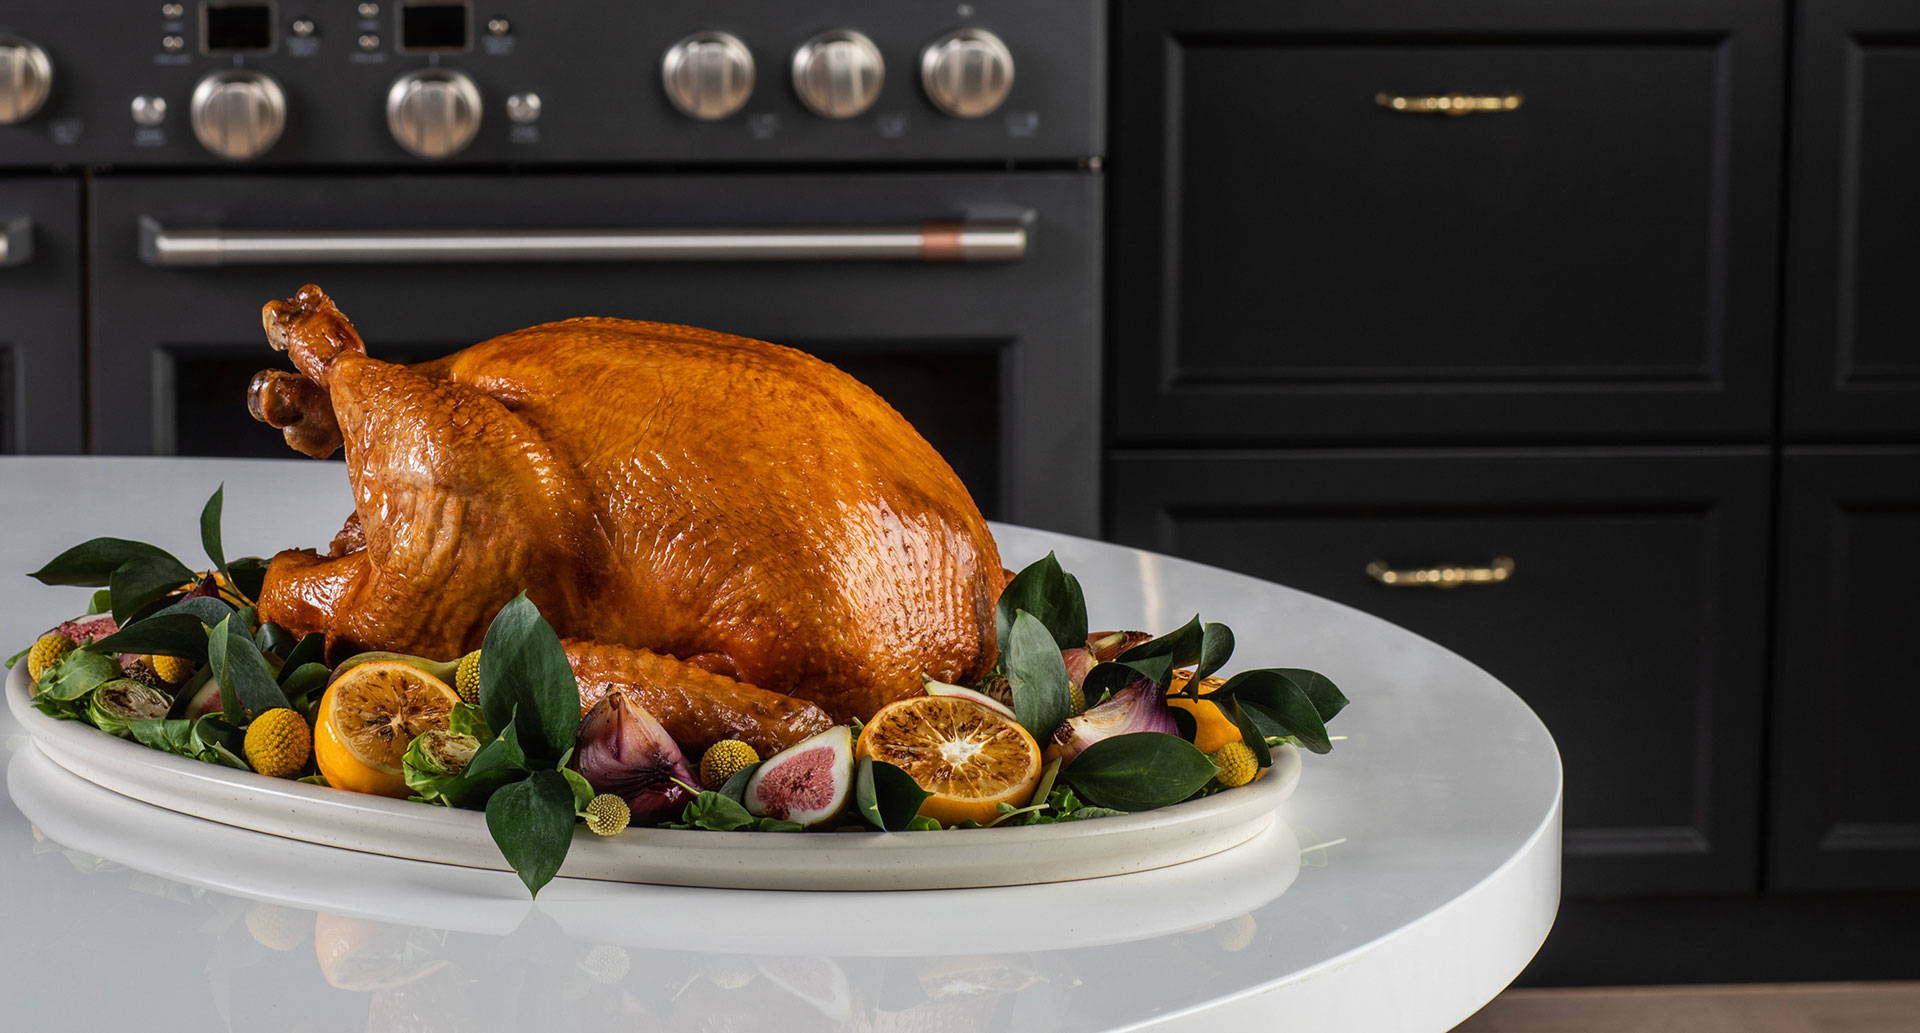 Roasted turkey on a dish with lemons, figs and festive greenery